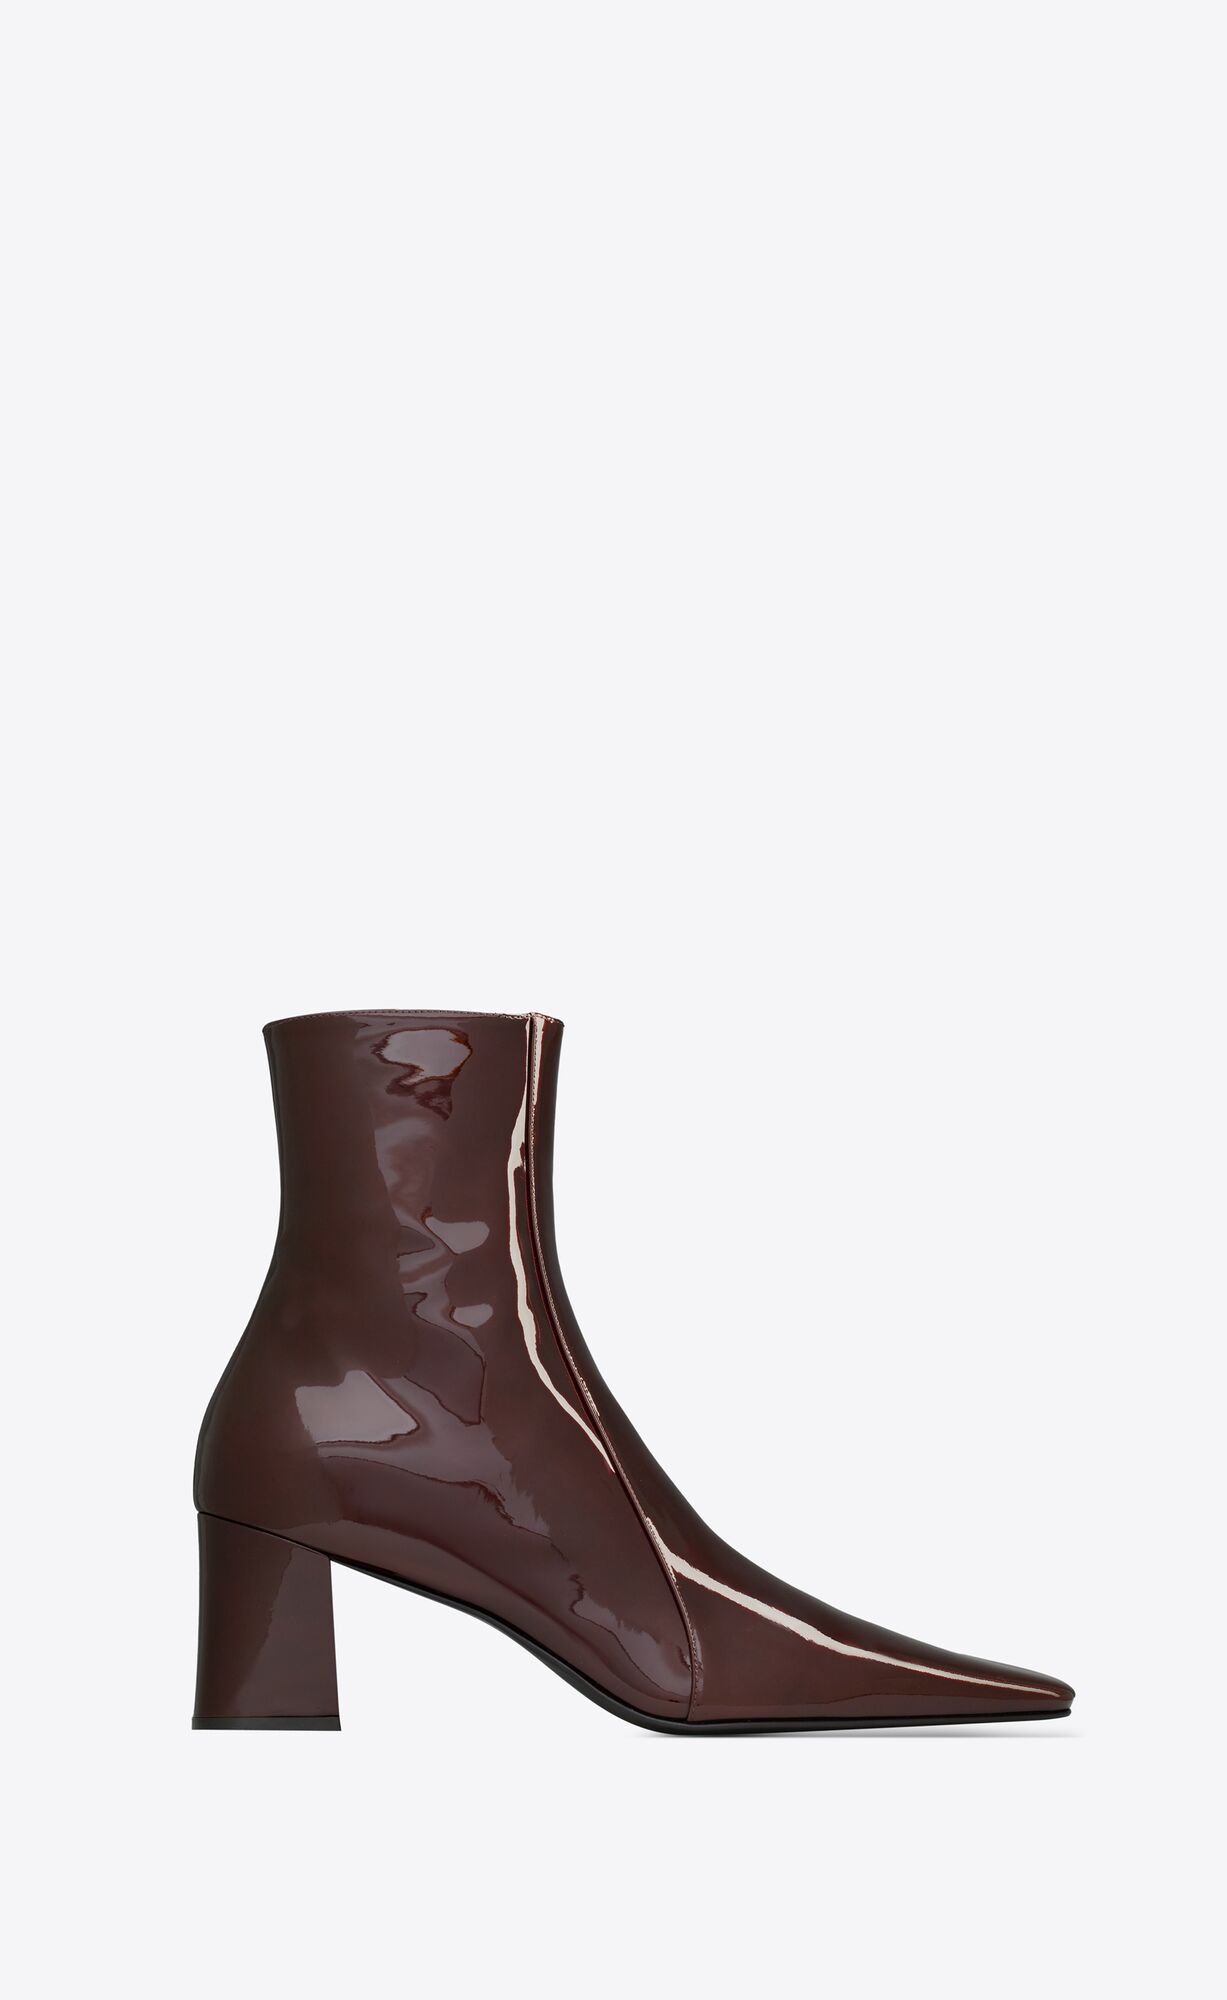 ankle boots with a square pointed toe and trapezoid heel, featuring a side zip closure. | Saint Laurent Inc. (Global)